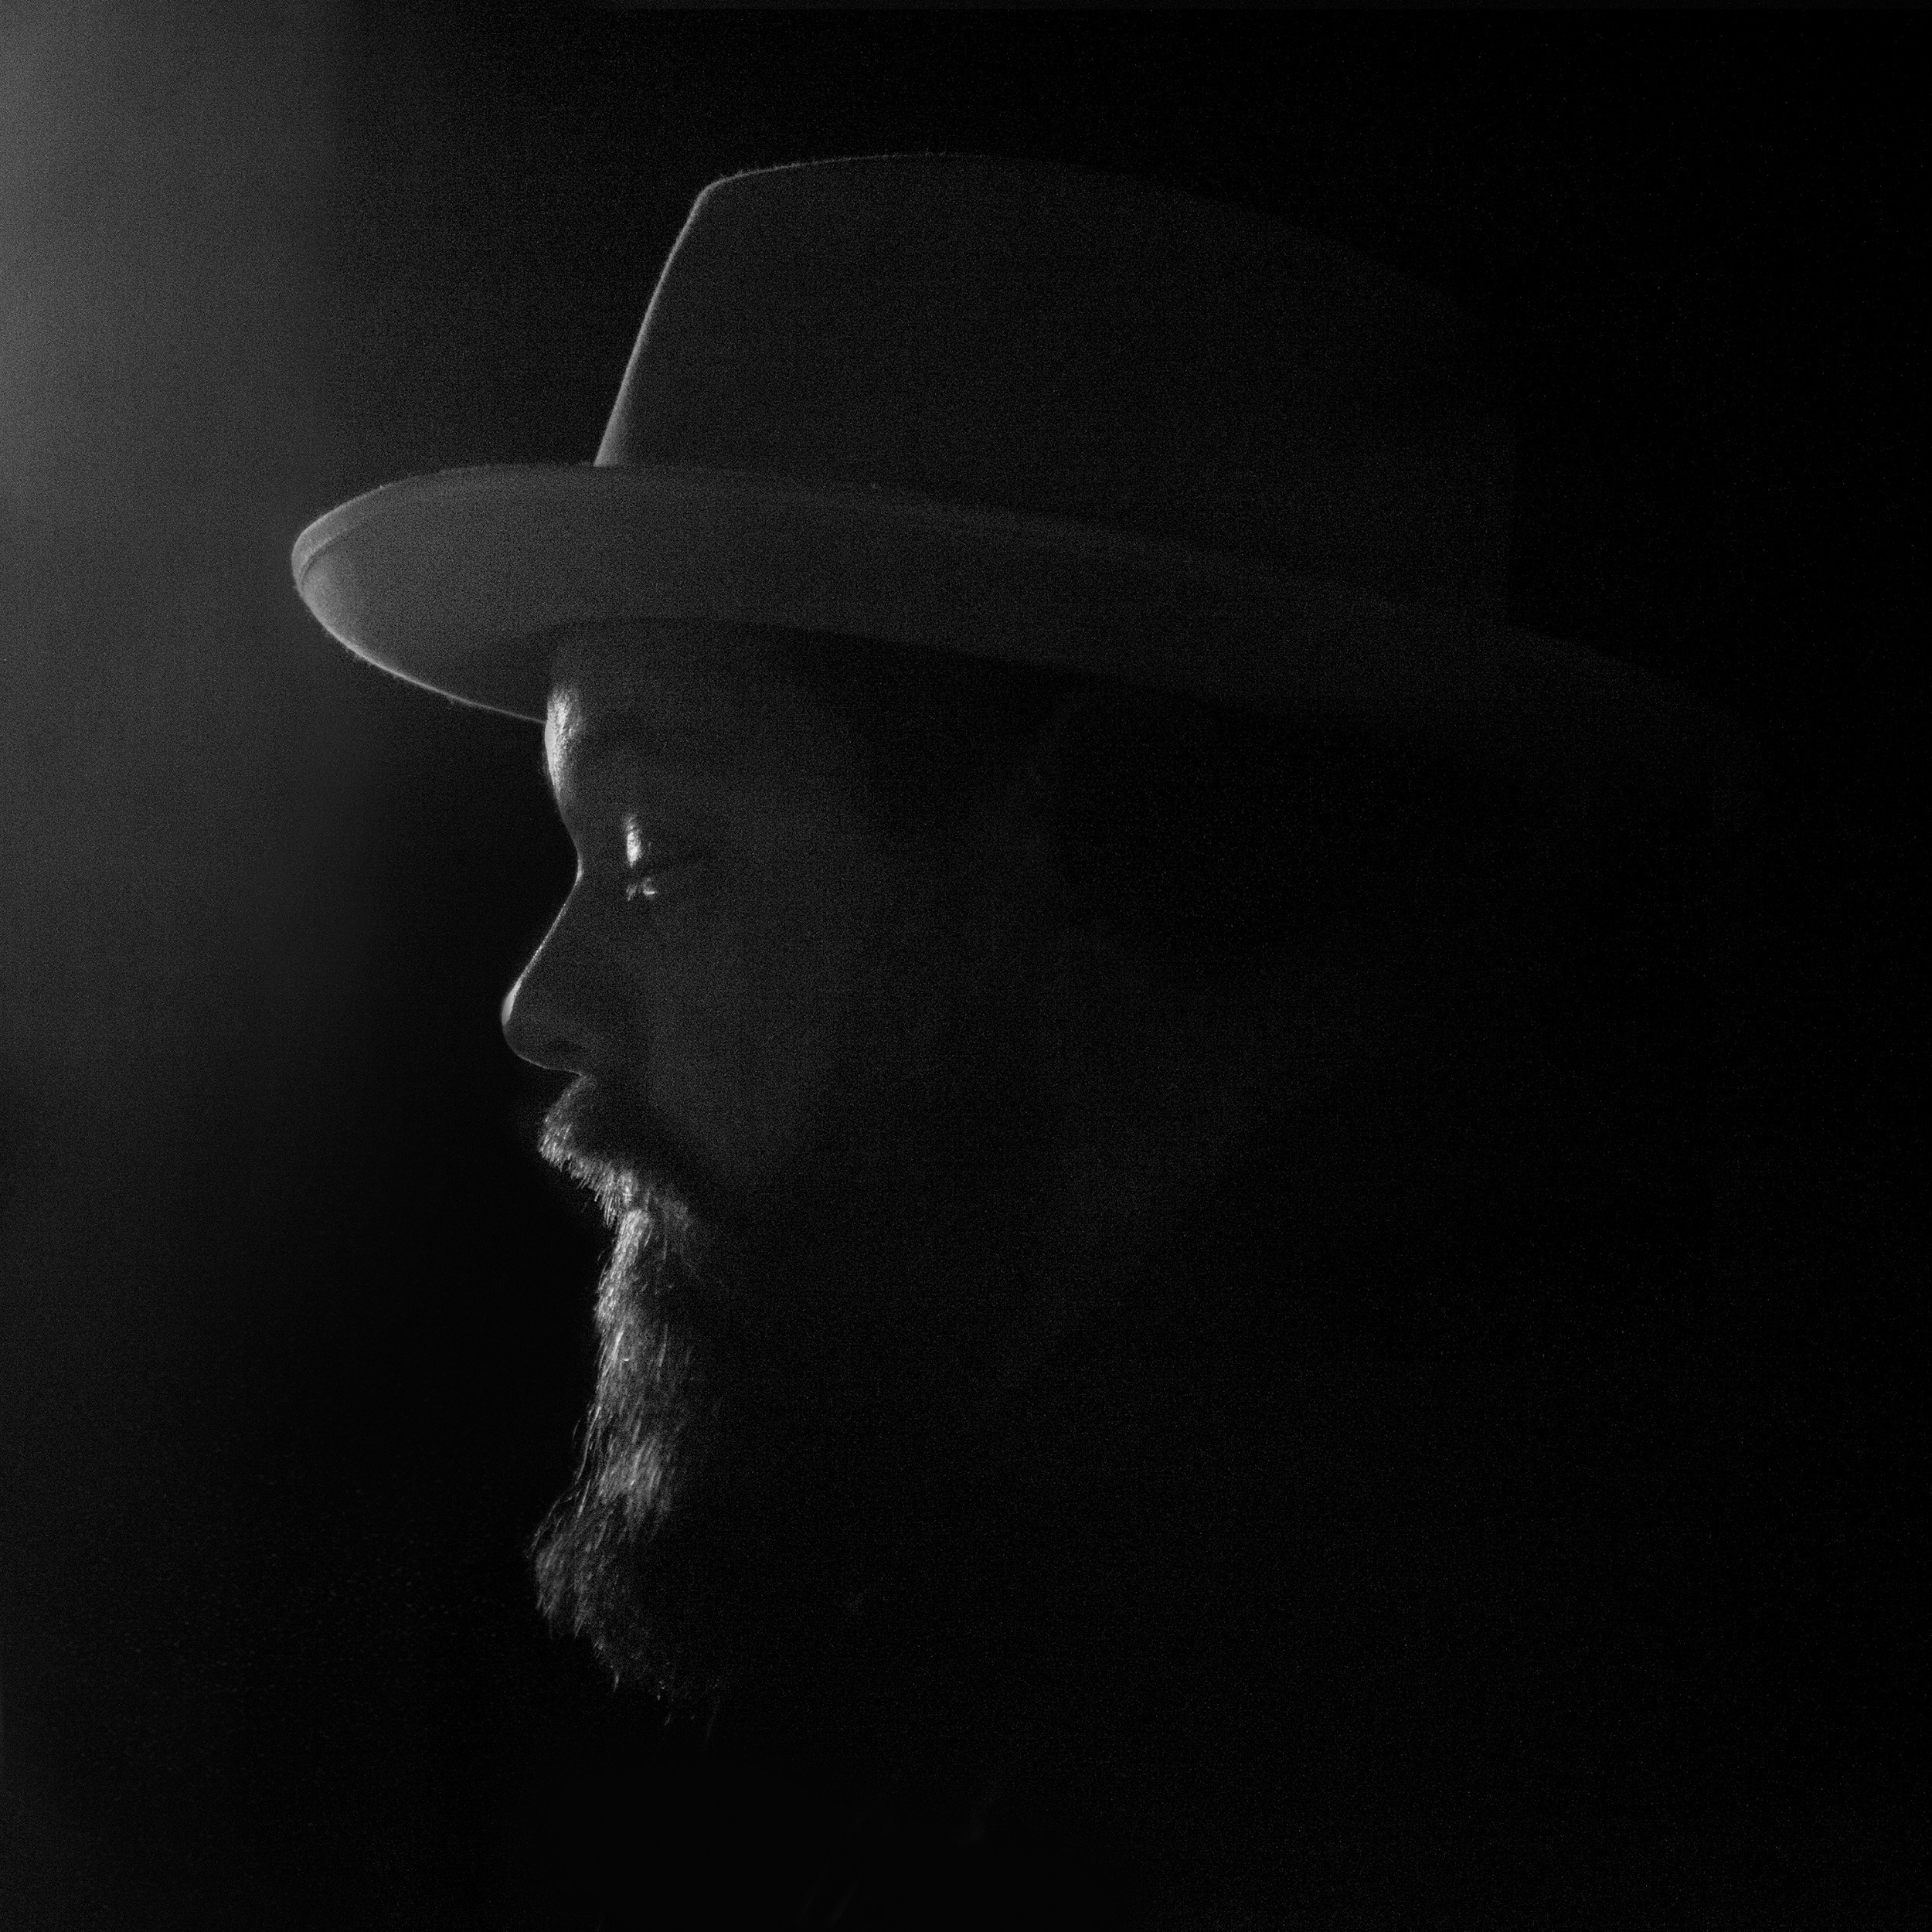 Nathaniel Rateliff & The Night Sweats Team Up With Lucius For “Coolin’ Out”